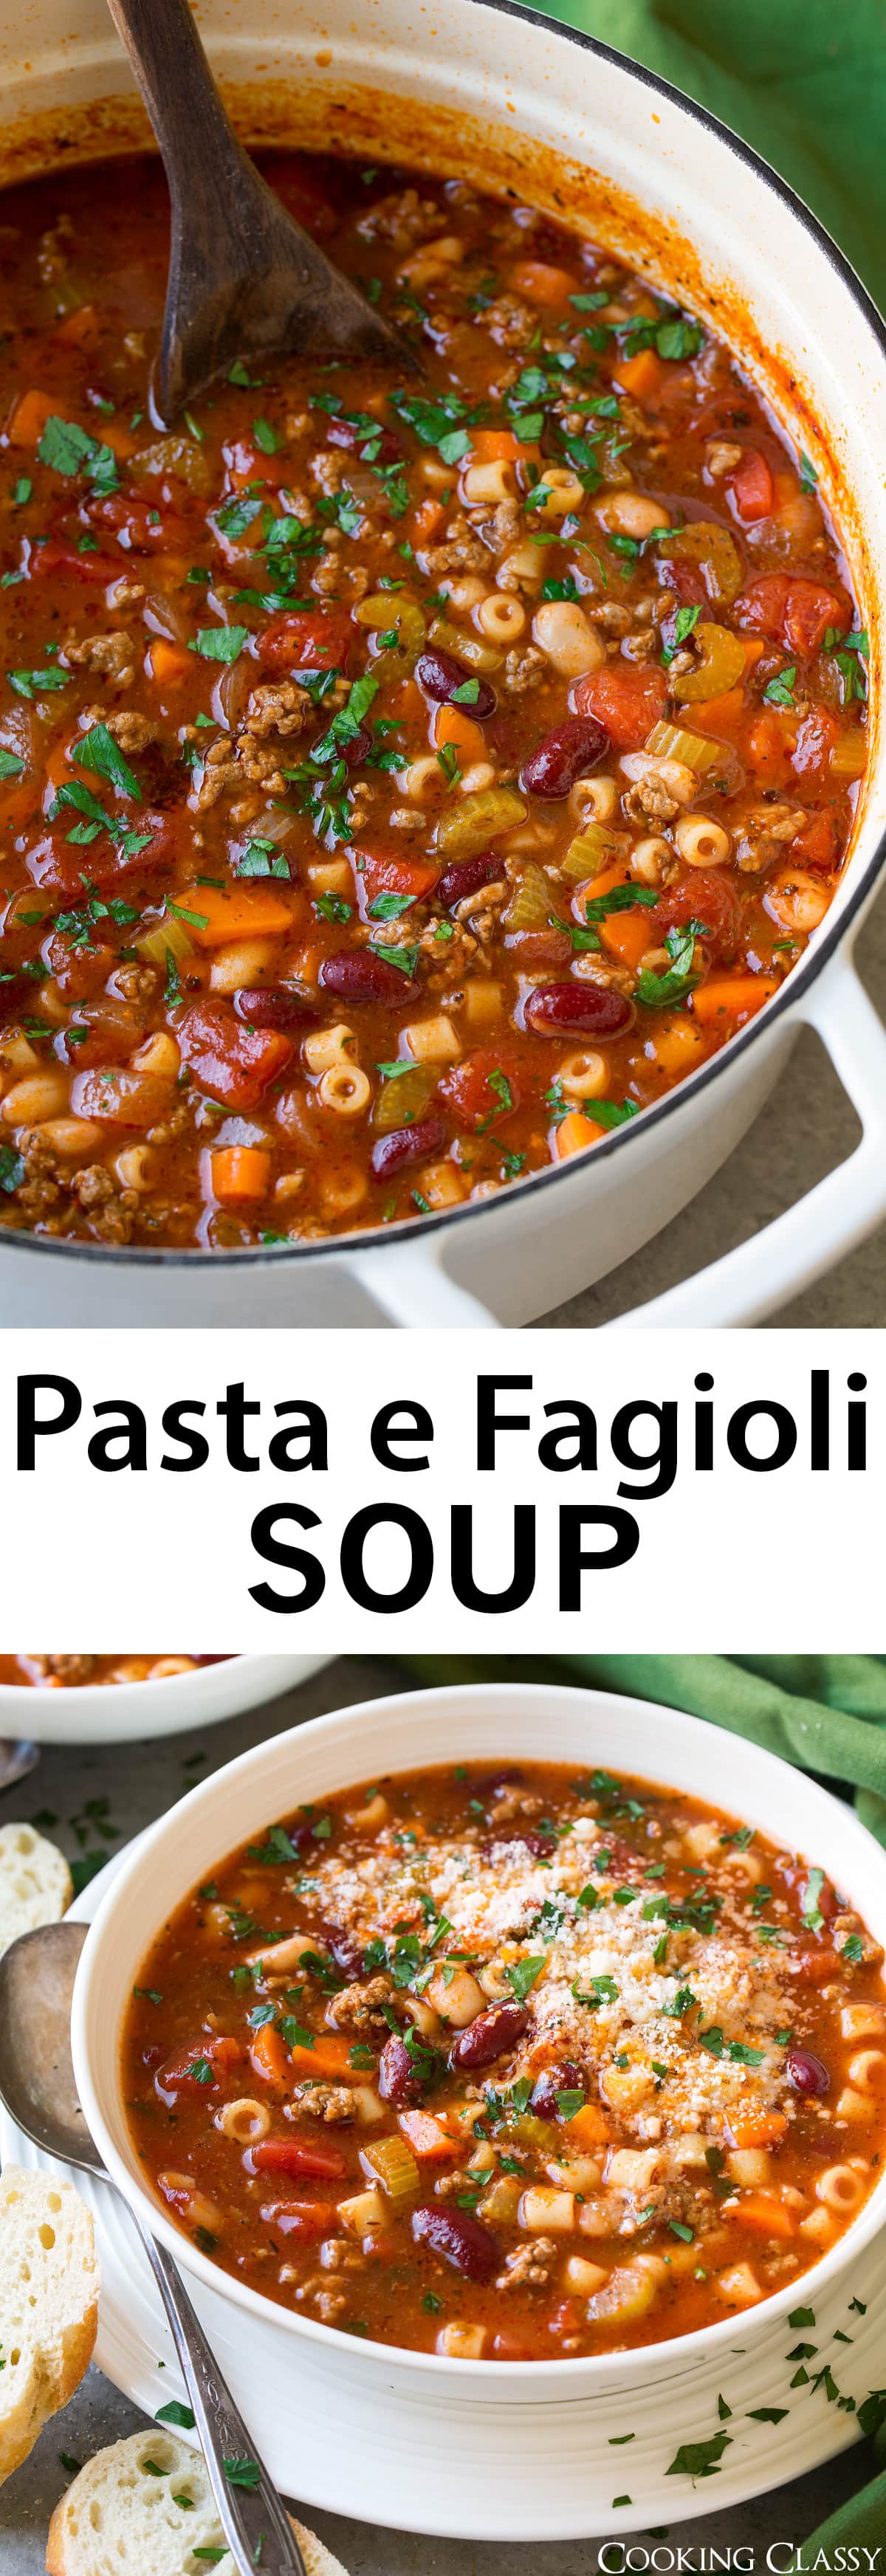 Pasta Fagioli Soup {Better than Olive Garden's!} - Cooking Classy